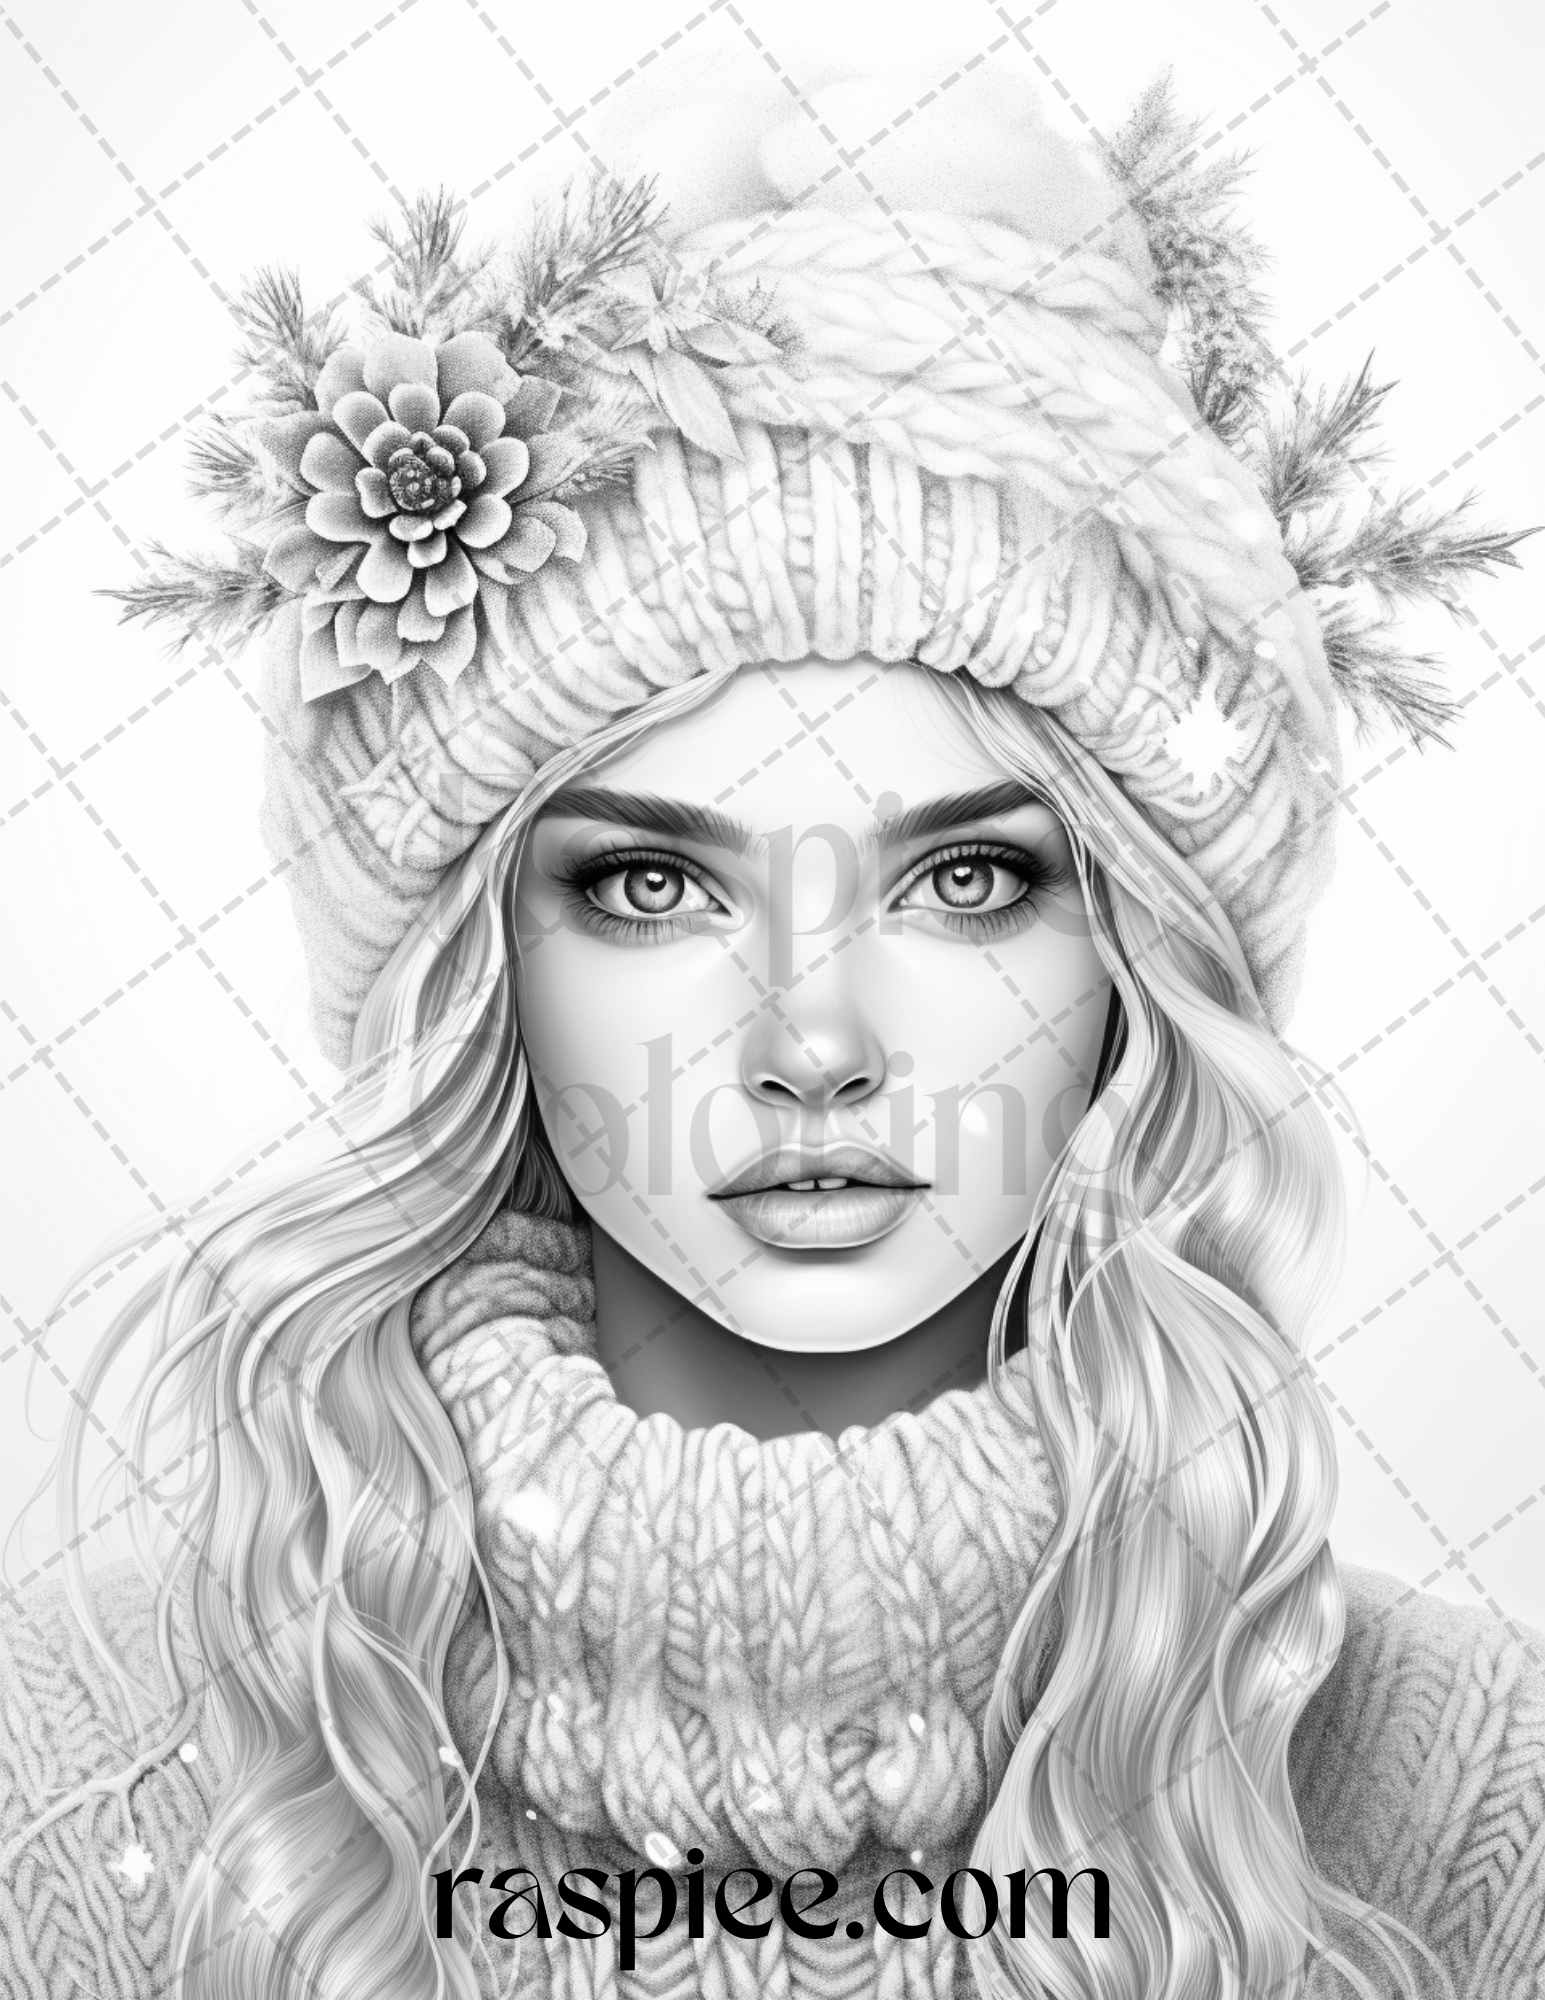 Winter girls grayscale coloring pages, printable adult coloring pages, winter-themed grayscale illustrations, beautiful winter girls artwork, christmas theme coloring, christmas coloring pages for adults